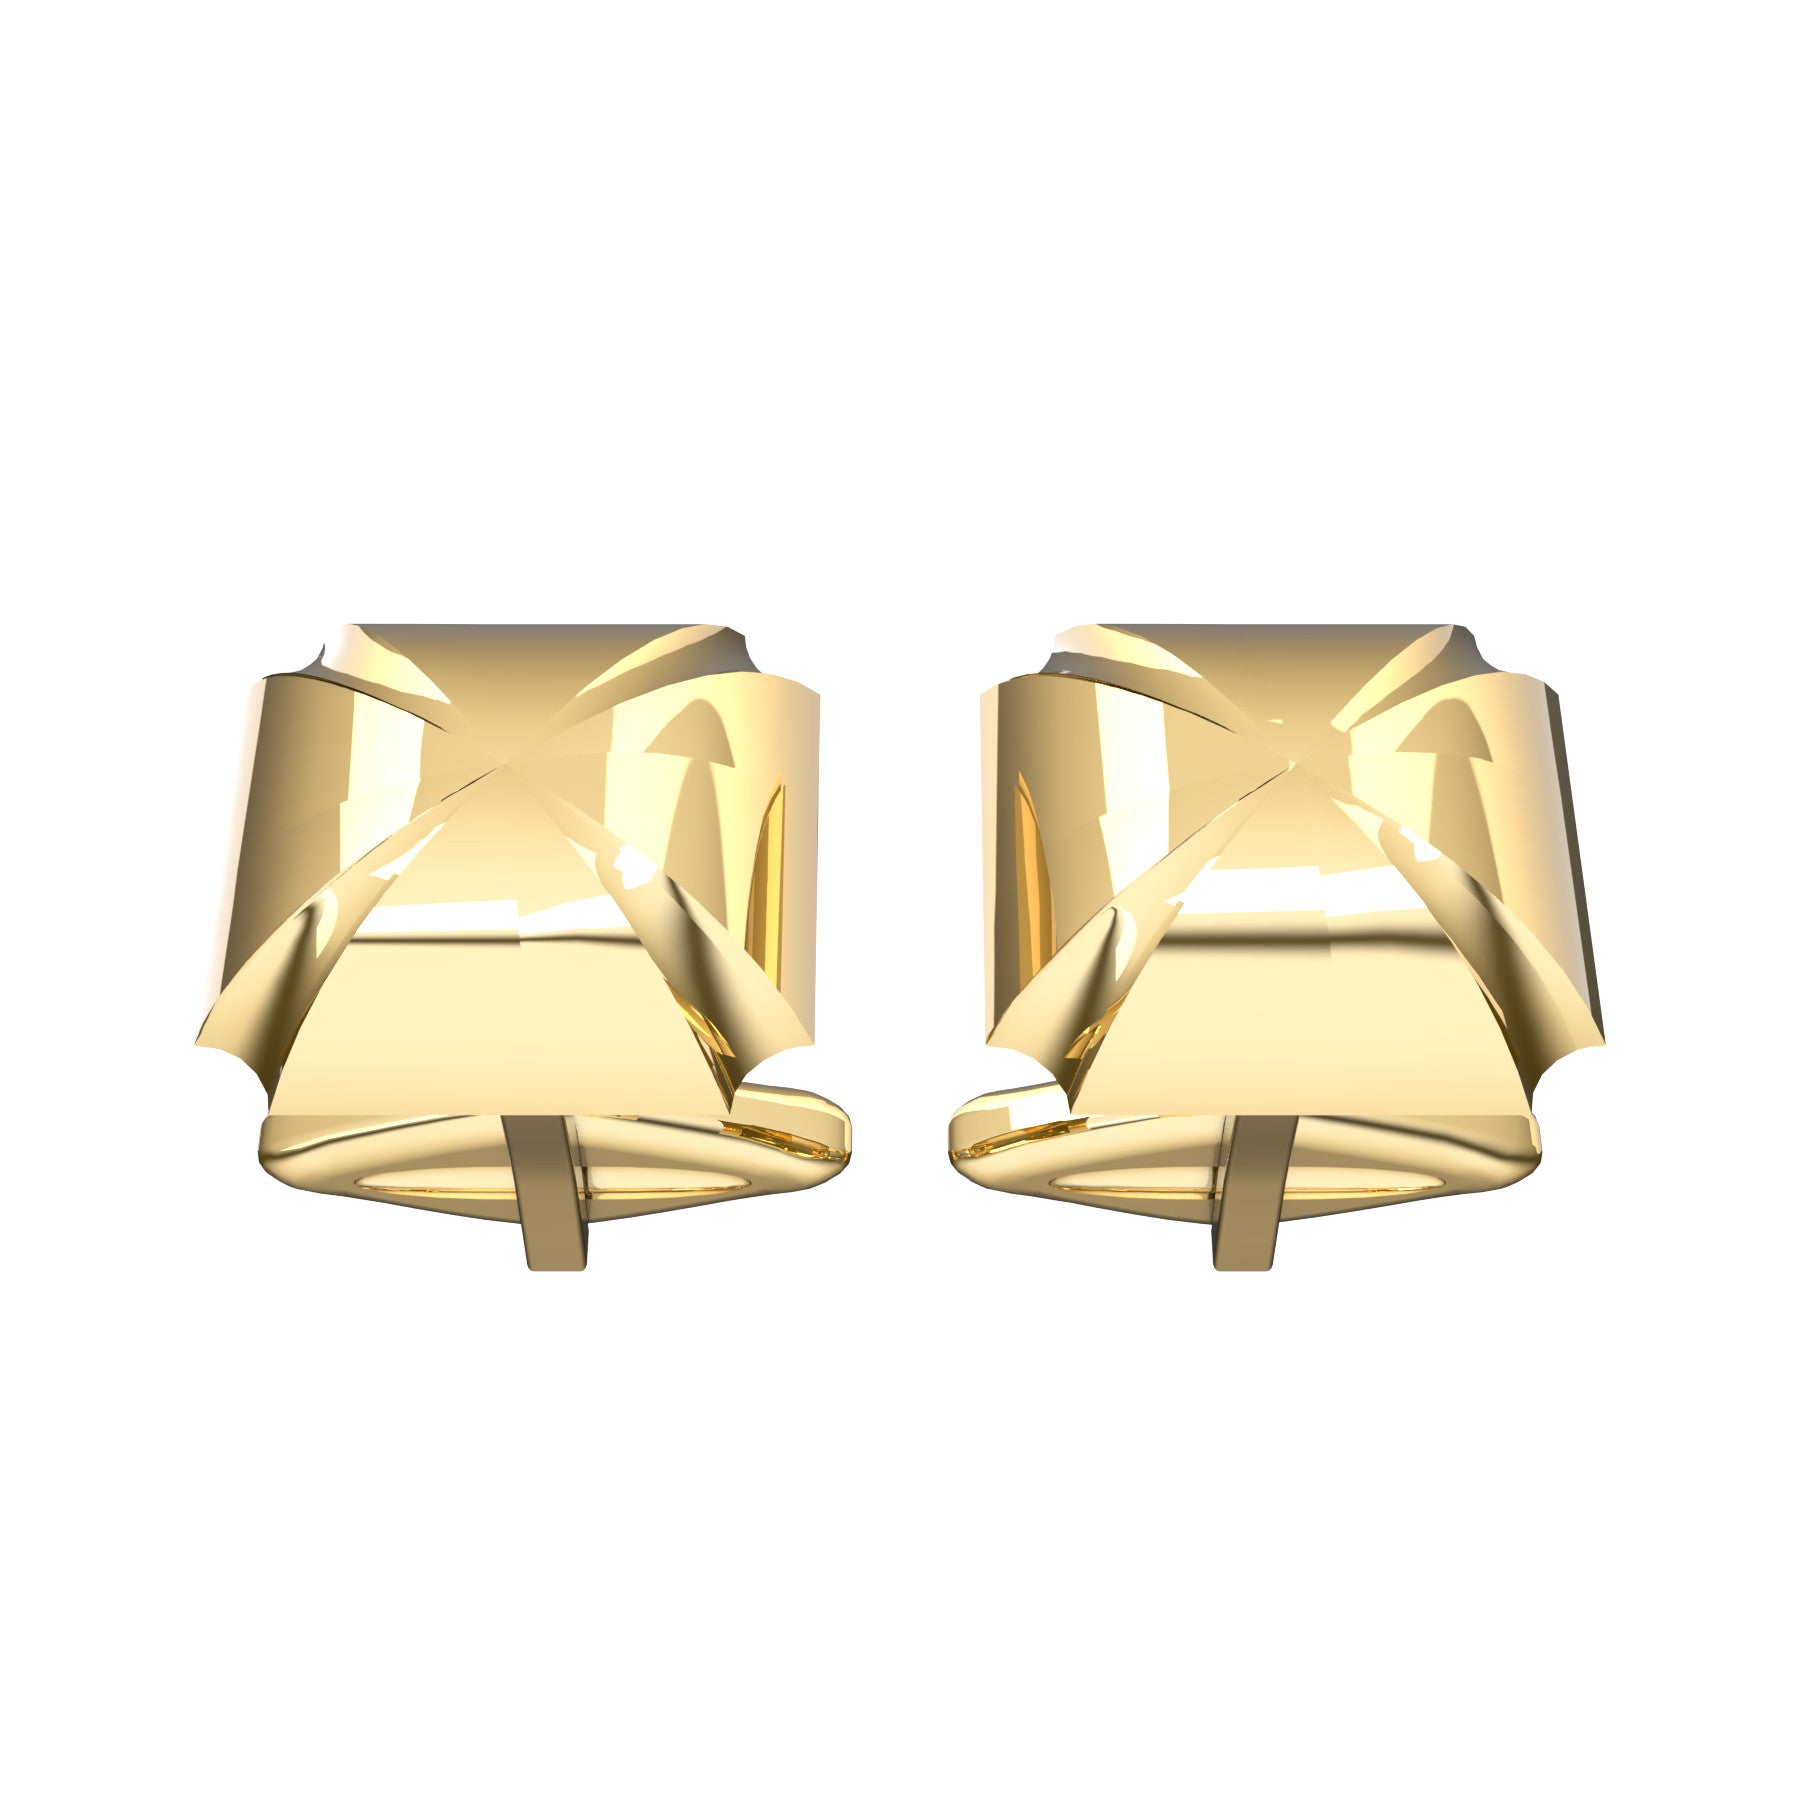 rounded square, 18 K yellow gold, weight about 10,5 g (0.37 oz) size 15x15x4 mm